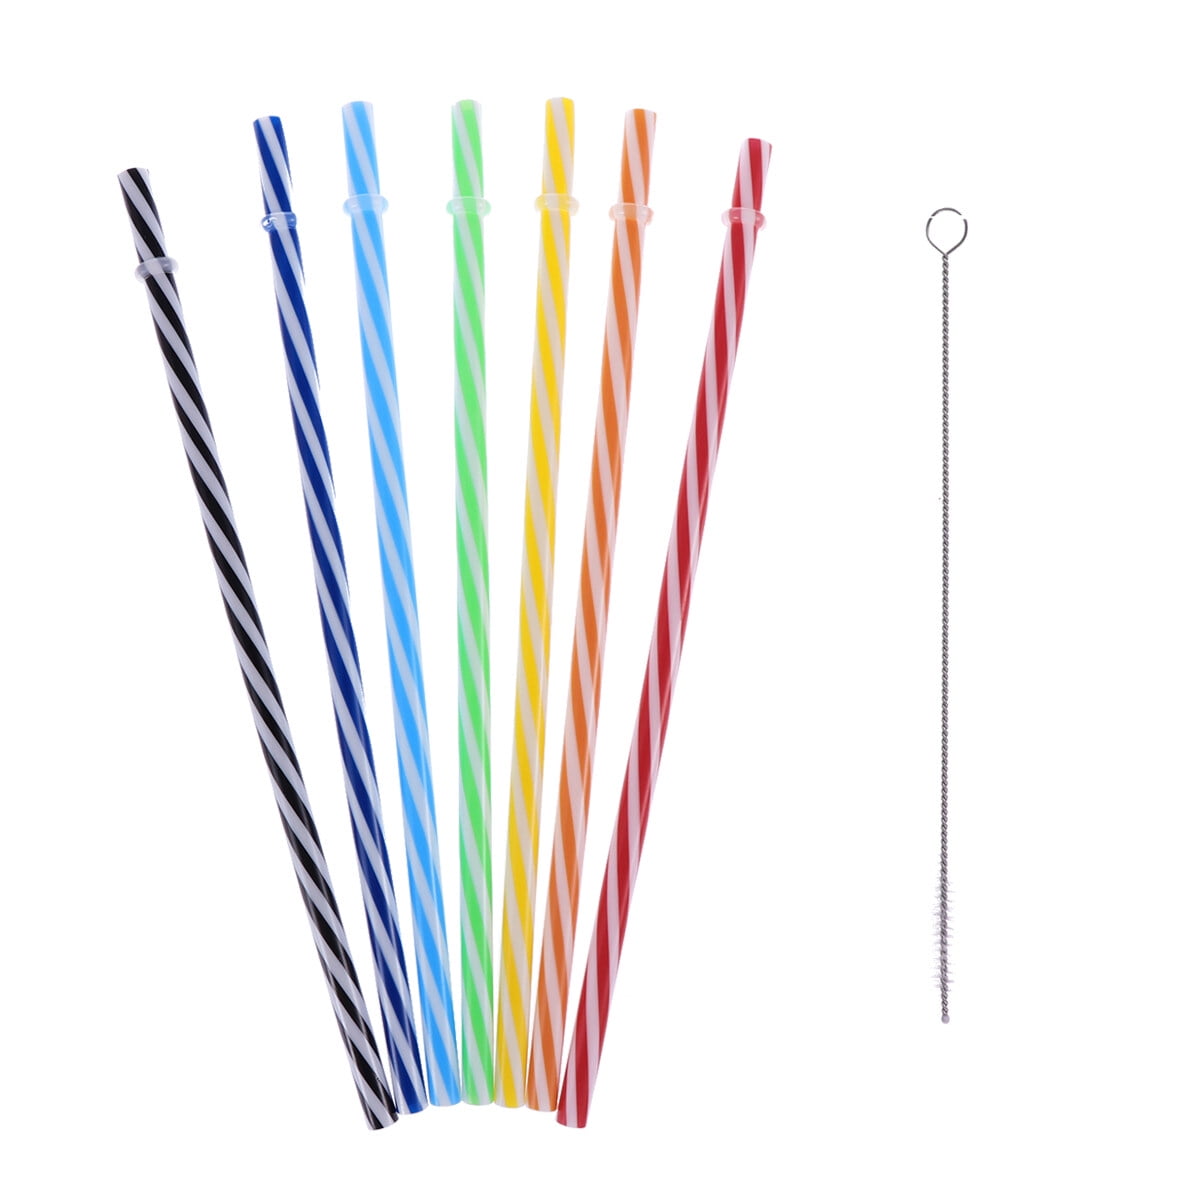 100pcs/set Double Color Threaded Ring Striped Hard Plastic Drinking Straws  With 2pcs Stainless Steel Cleaning Brushes, Mixed Colors